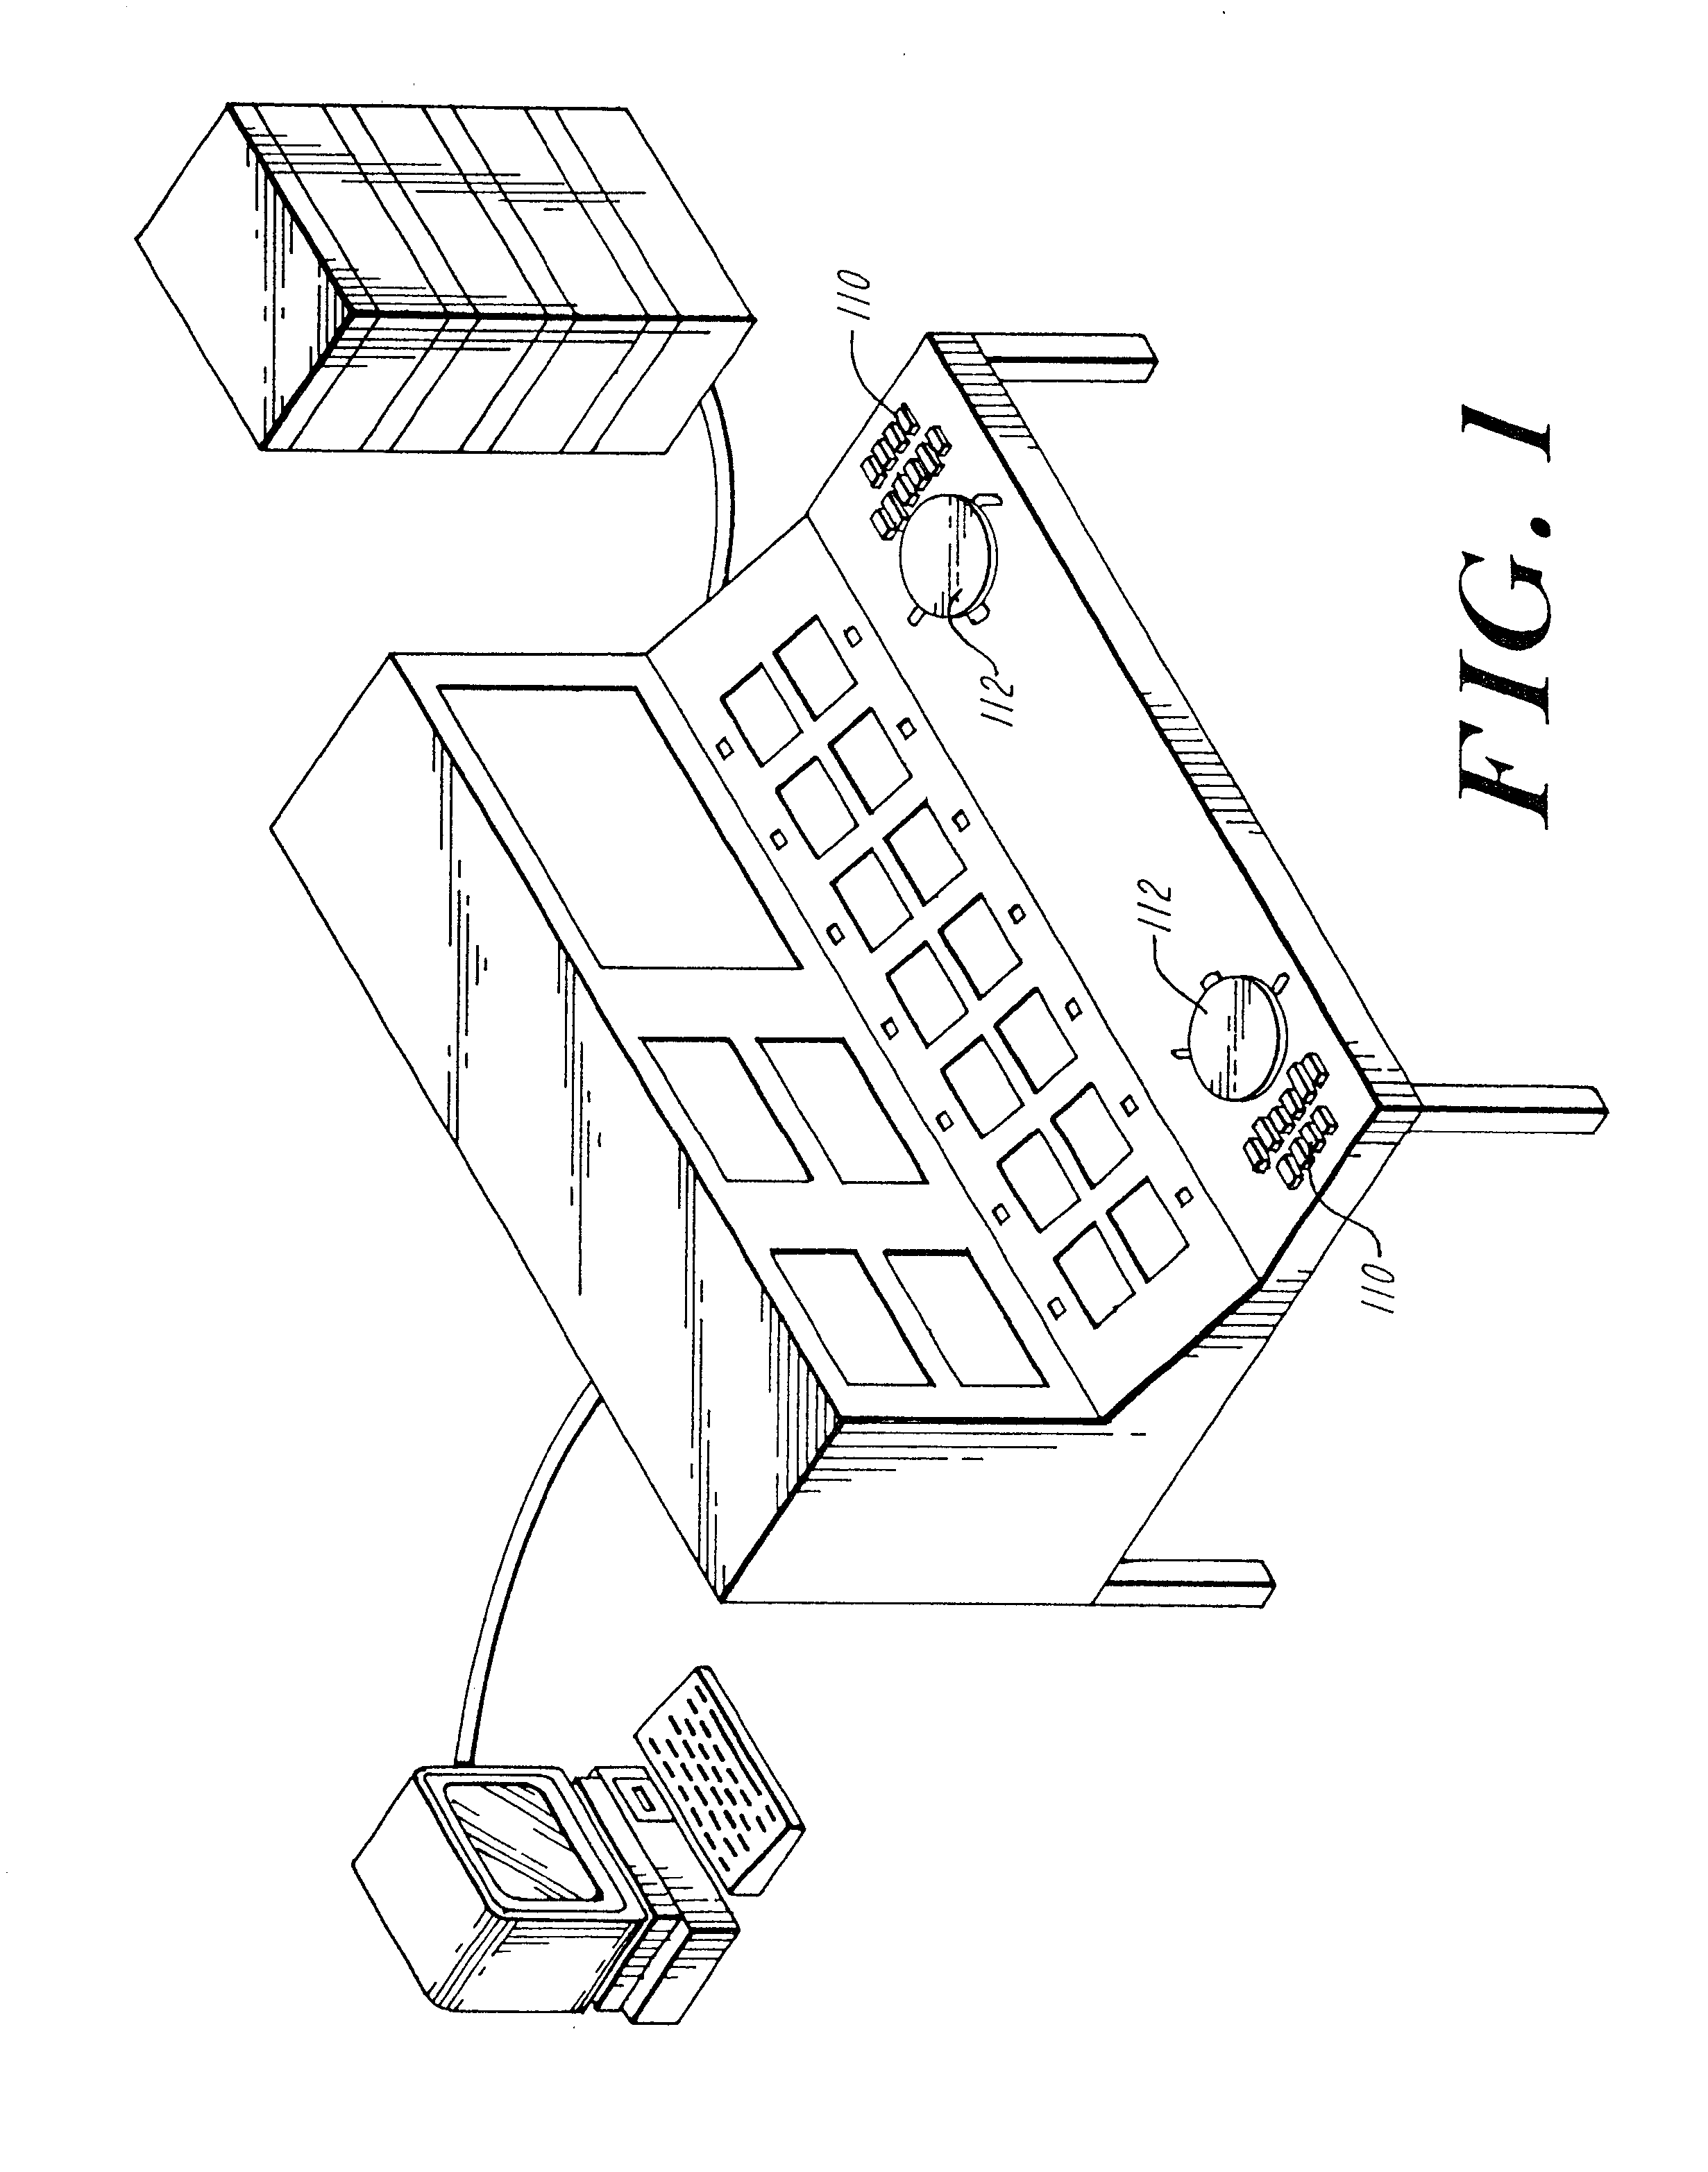 Method and apparatus for providing tactile responsiveness in an interface device